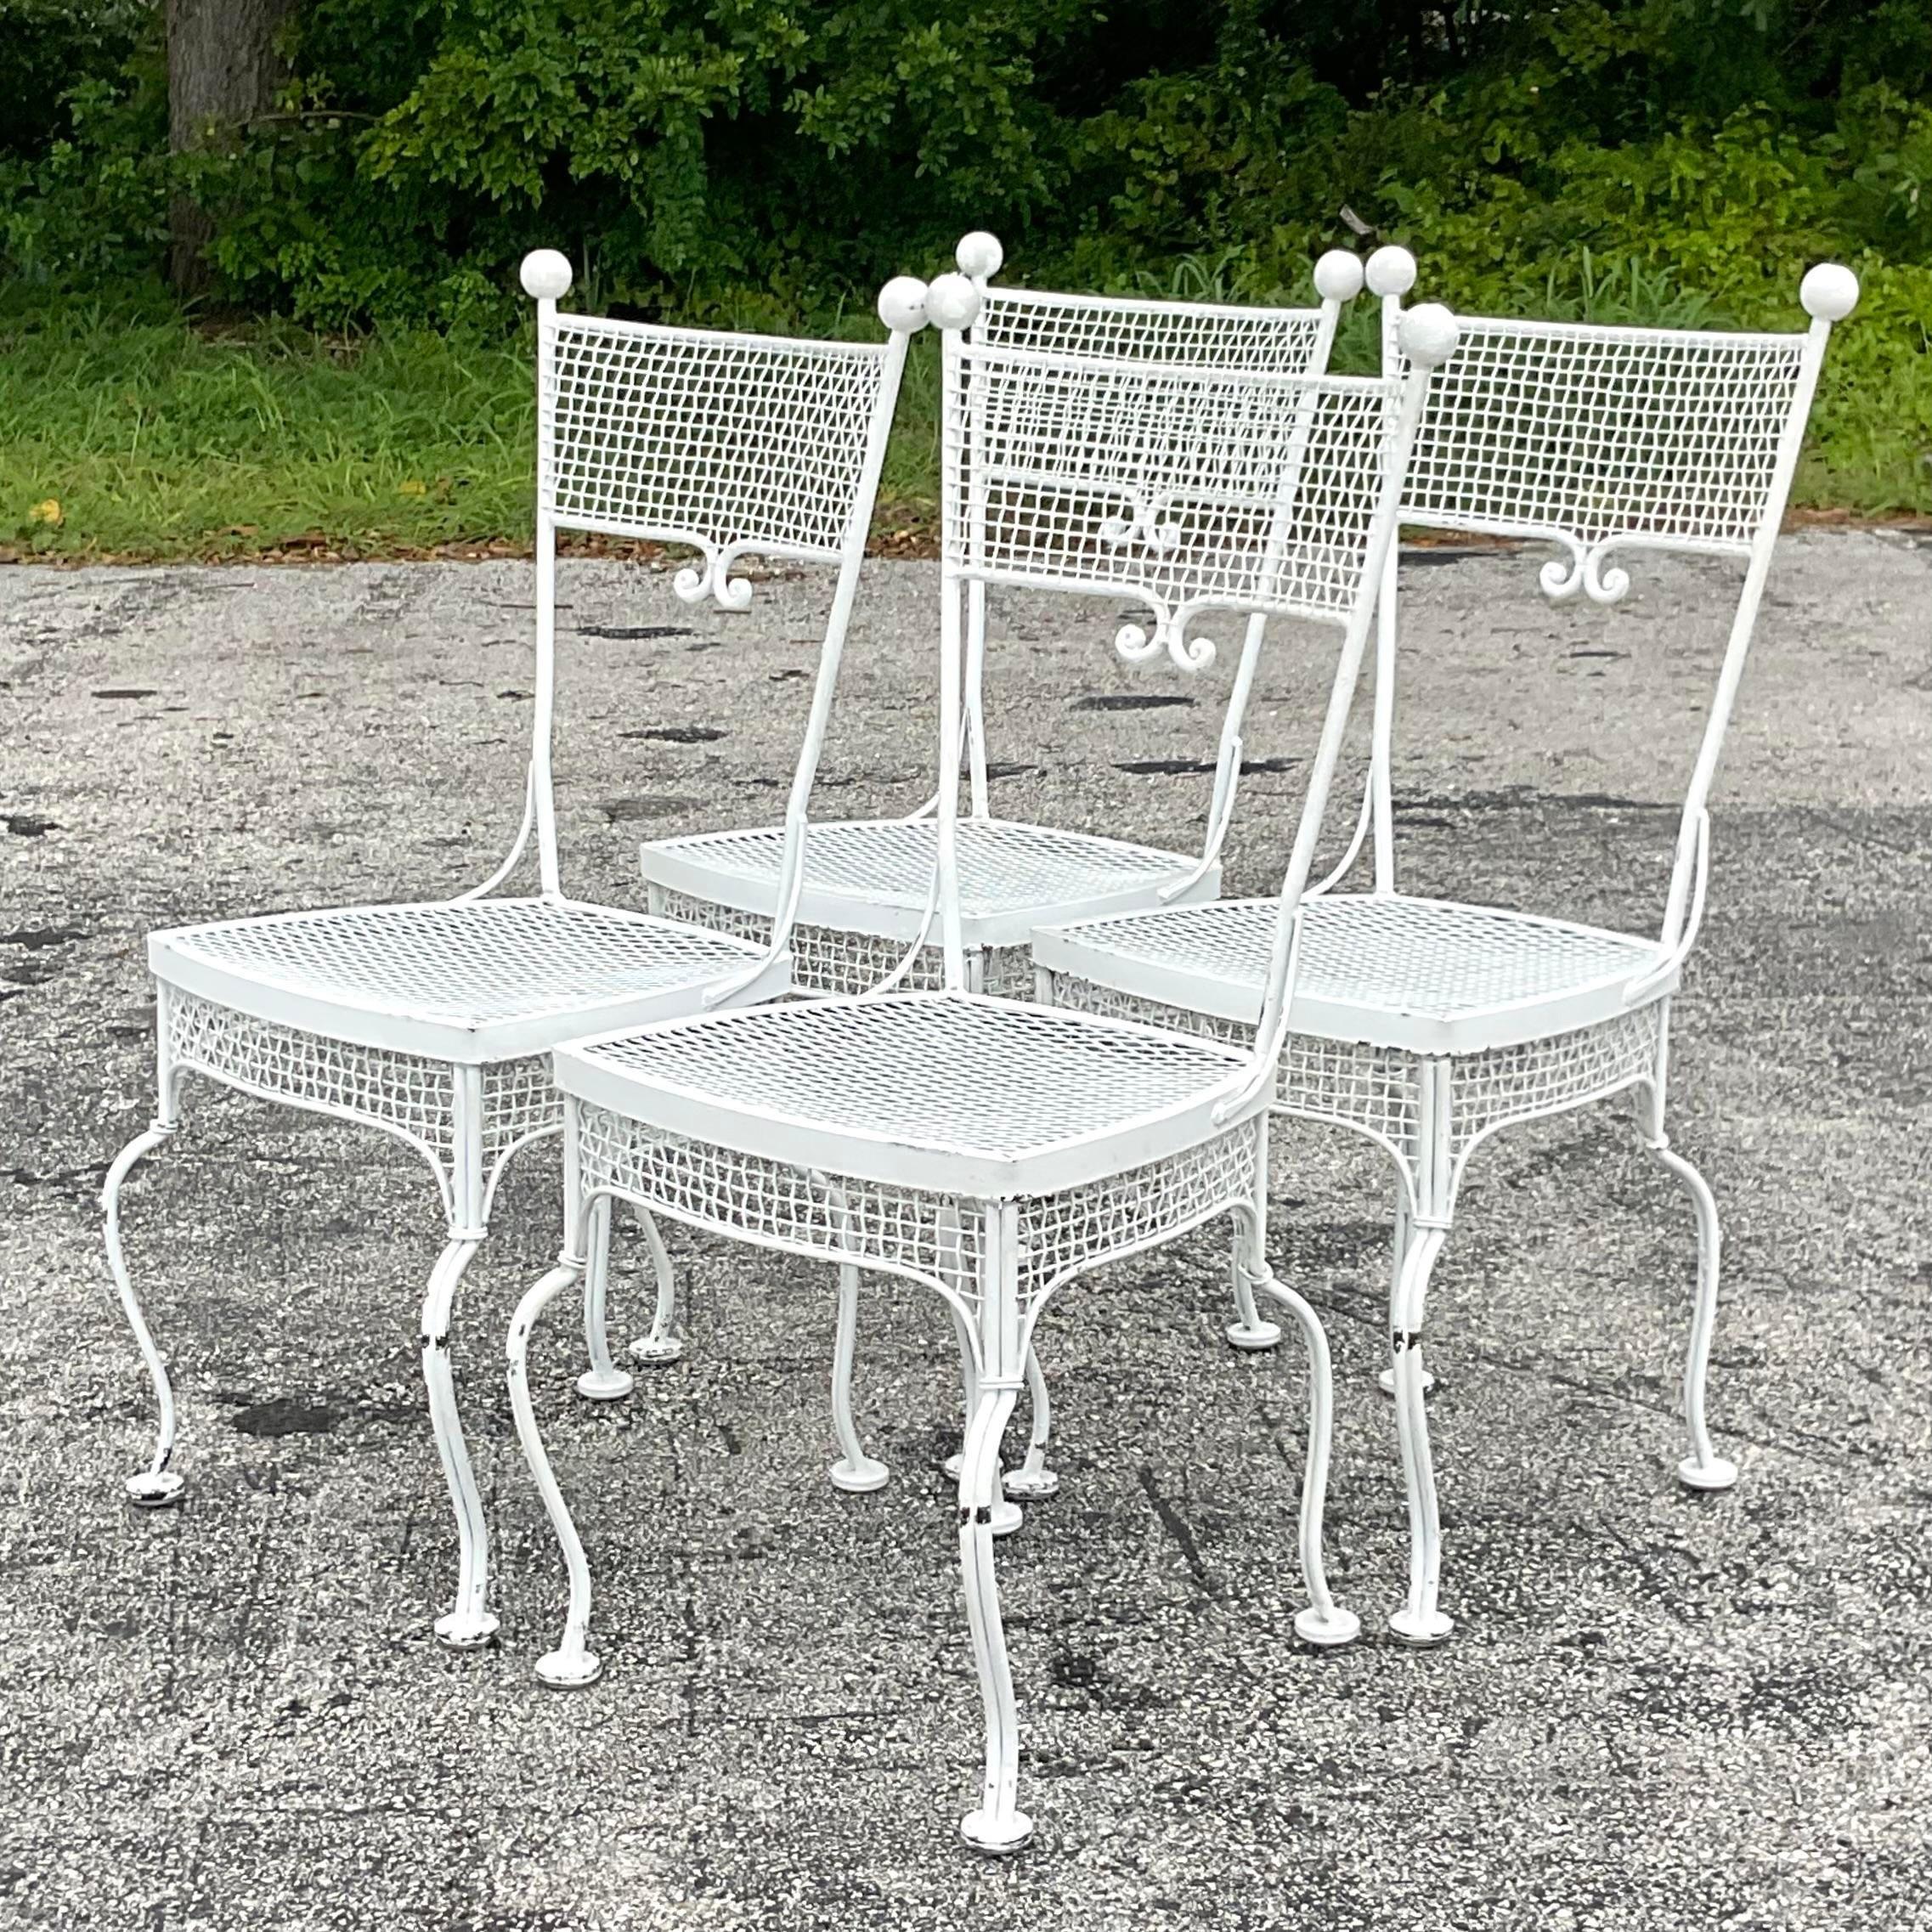 An incredible set of four vintage Coastal outdoor dining chairs. Done in the manner of Russell Woodard with his iconic metal mesh. Acquired from a Palm Beach estate.